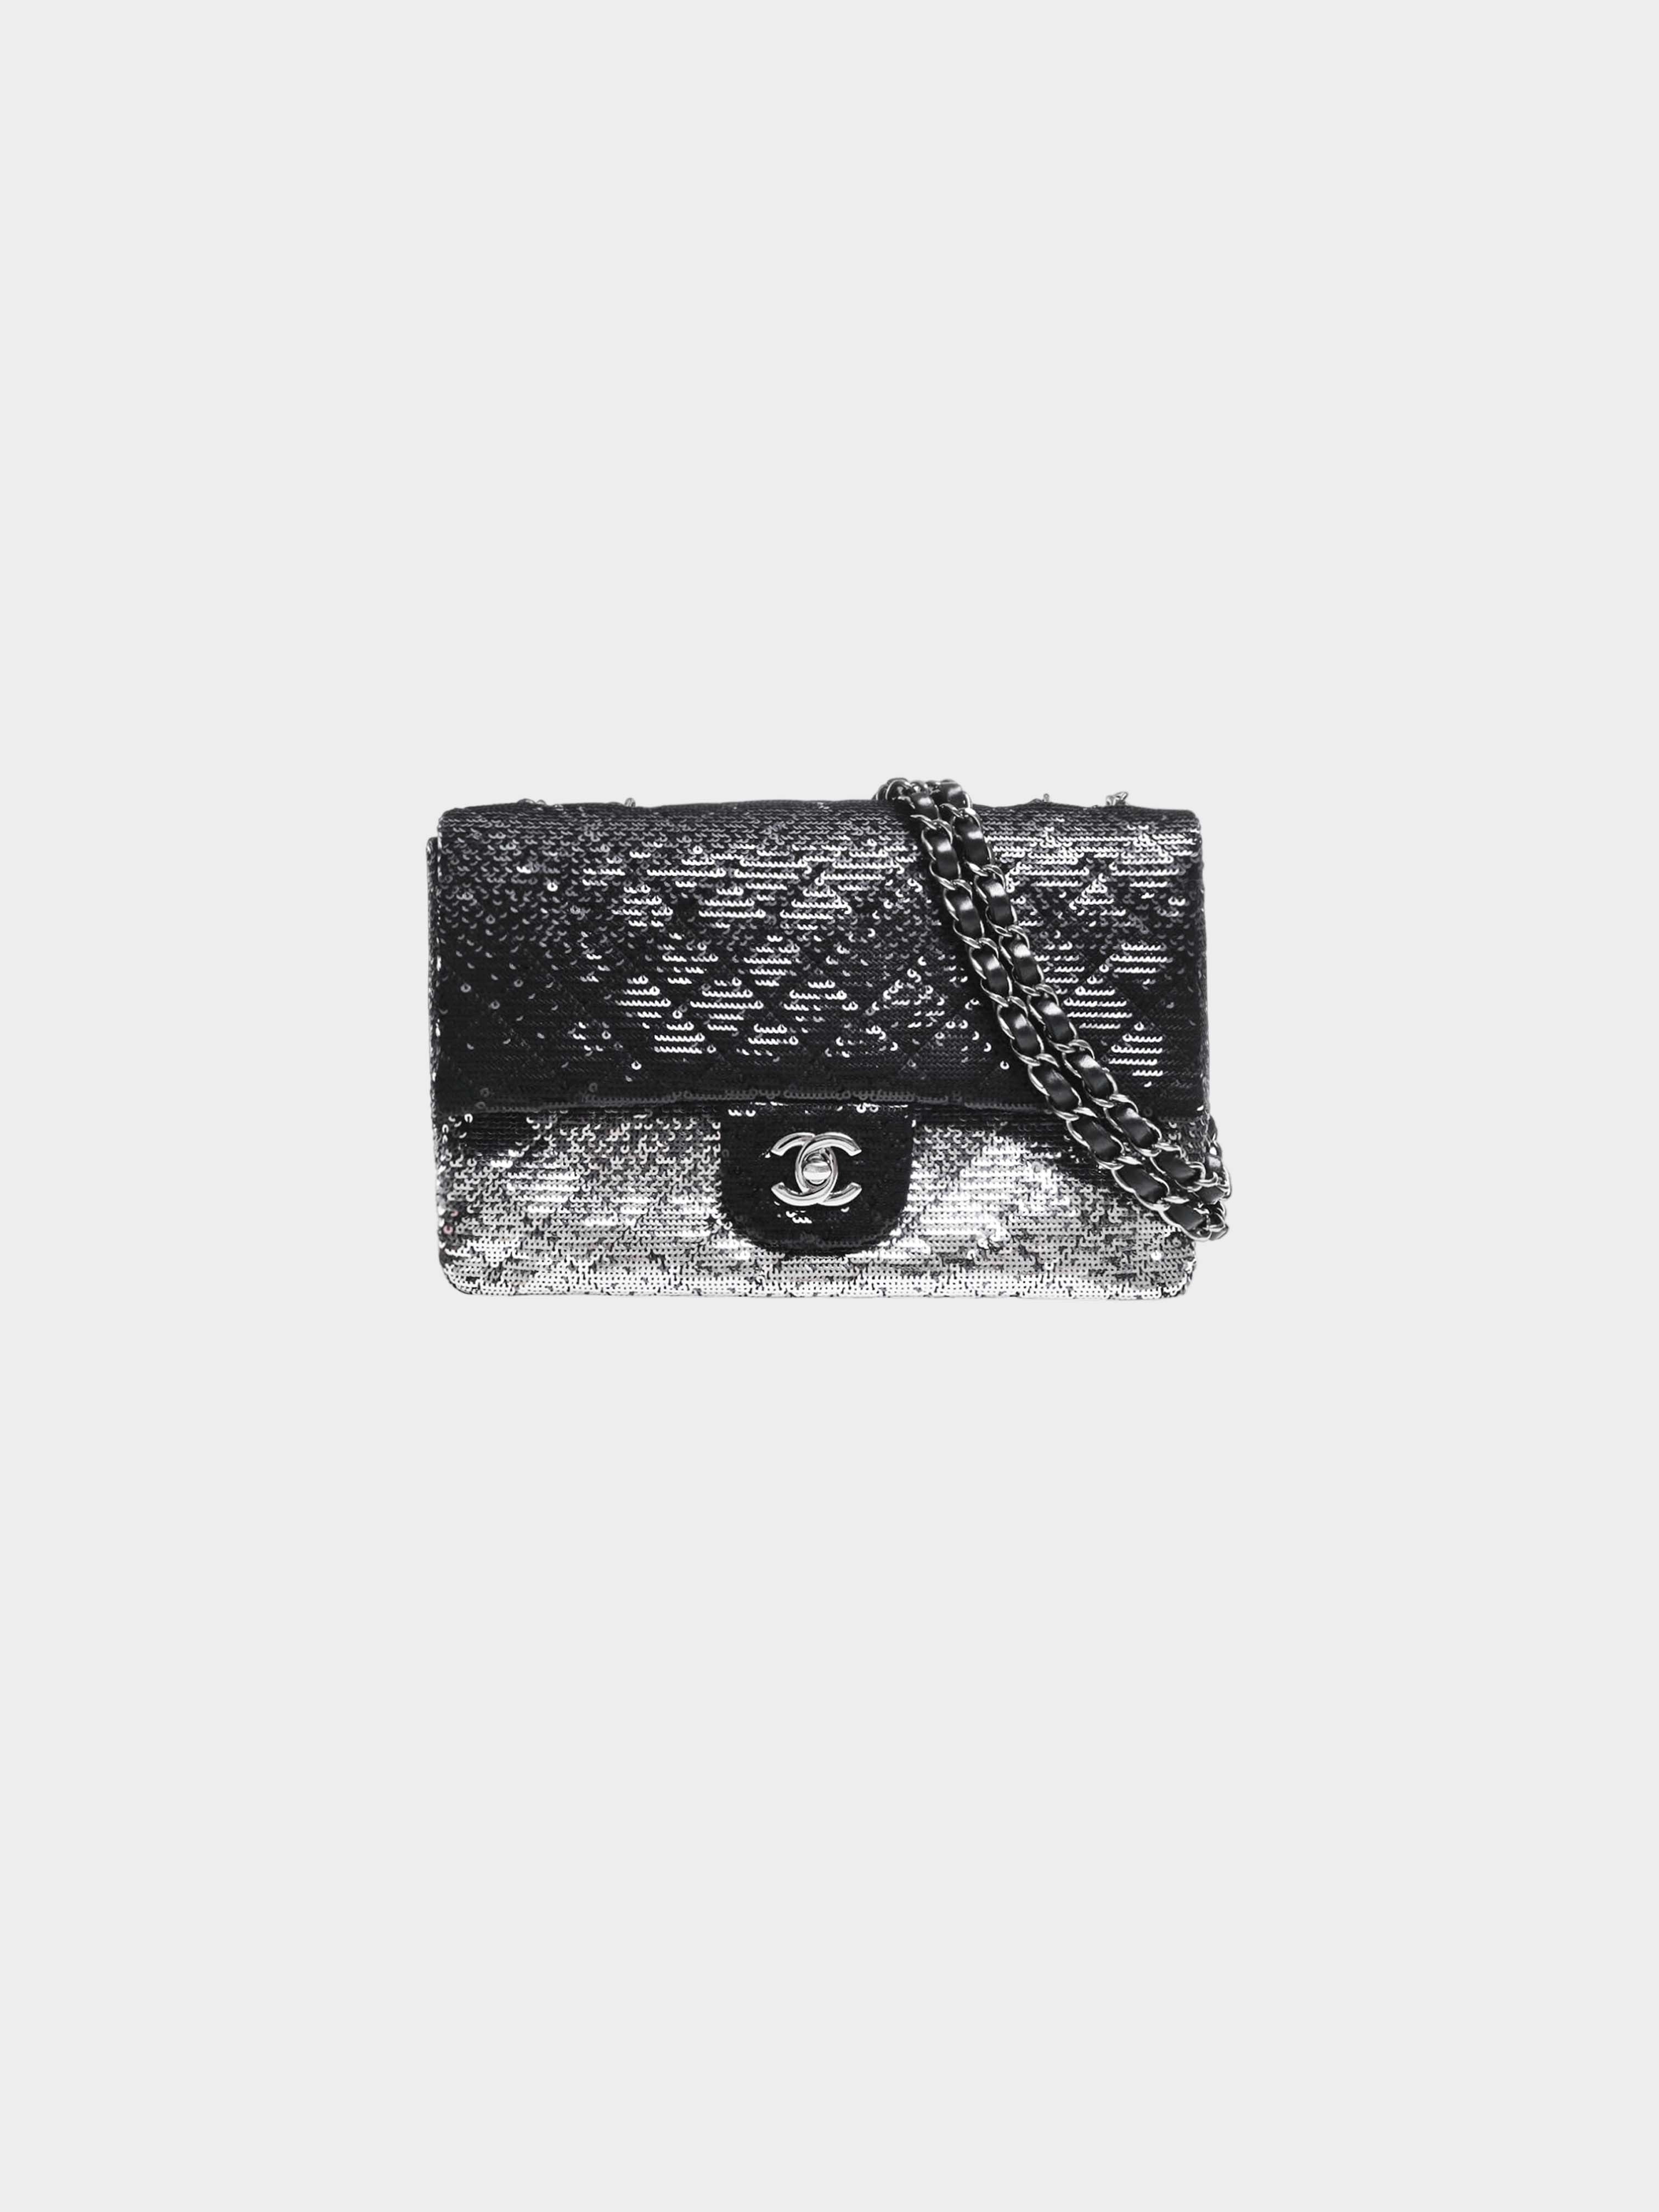 Chanel 2015-2016 Black and Silver Sequin Leather Flap Bag